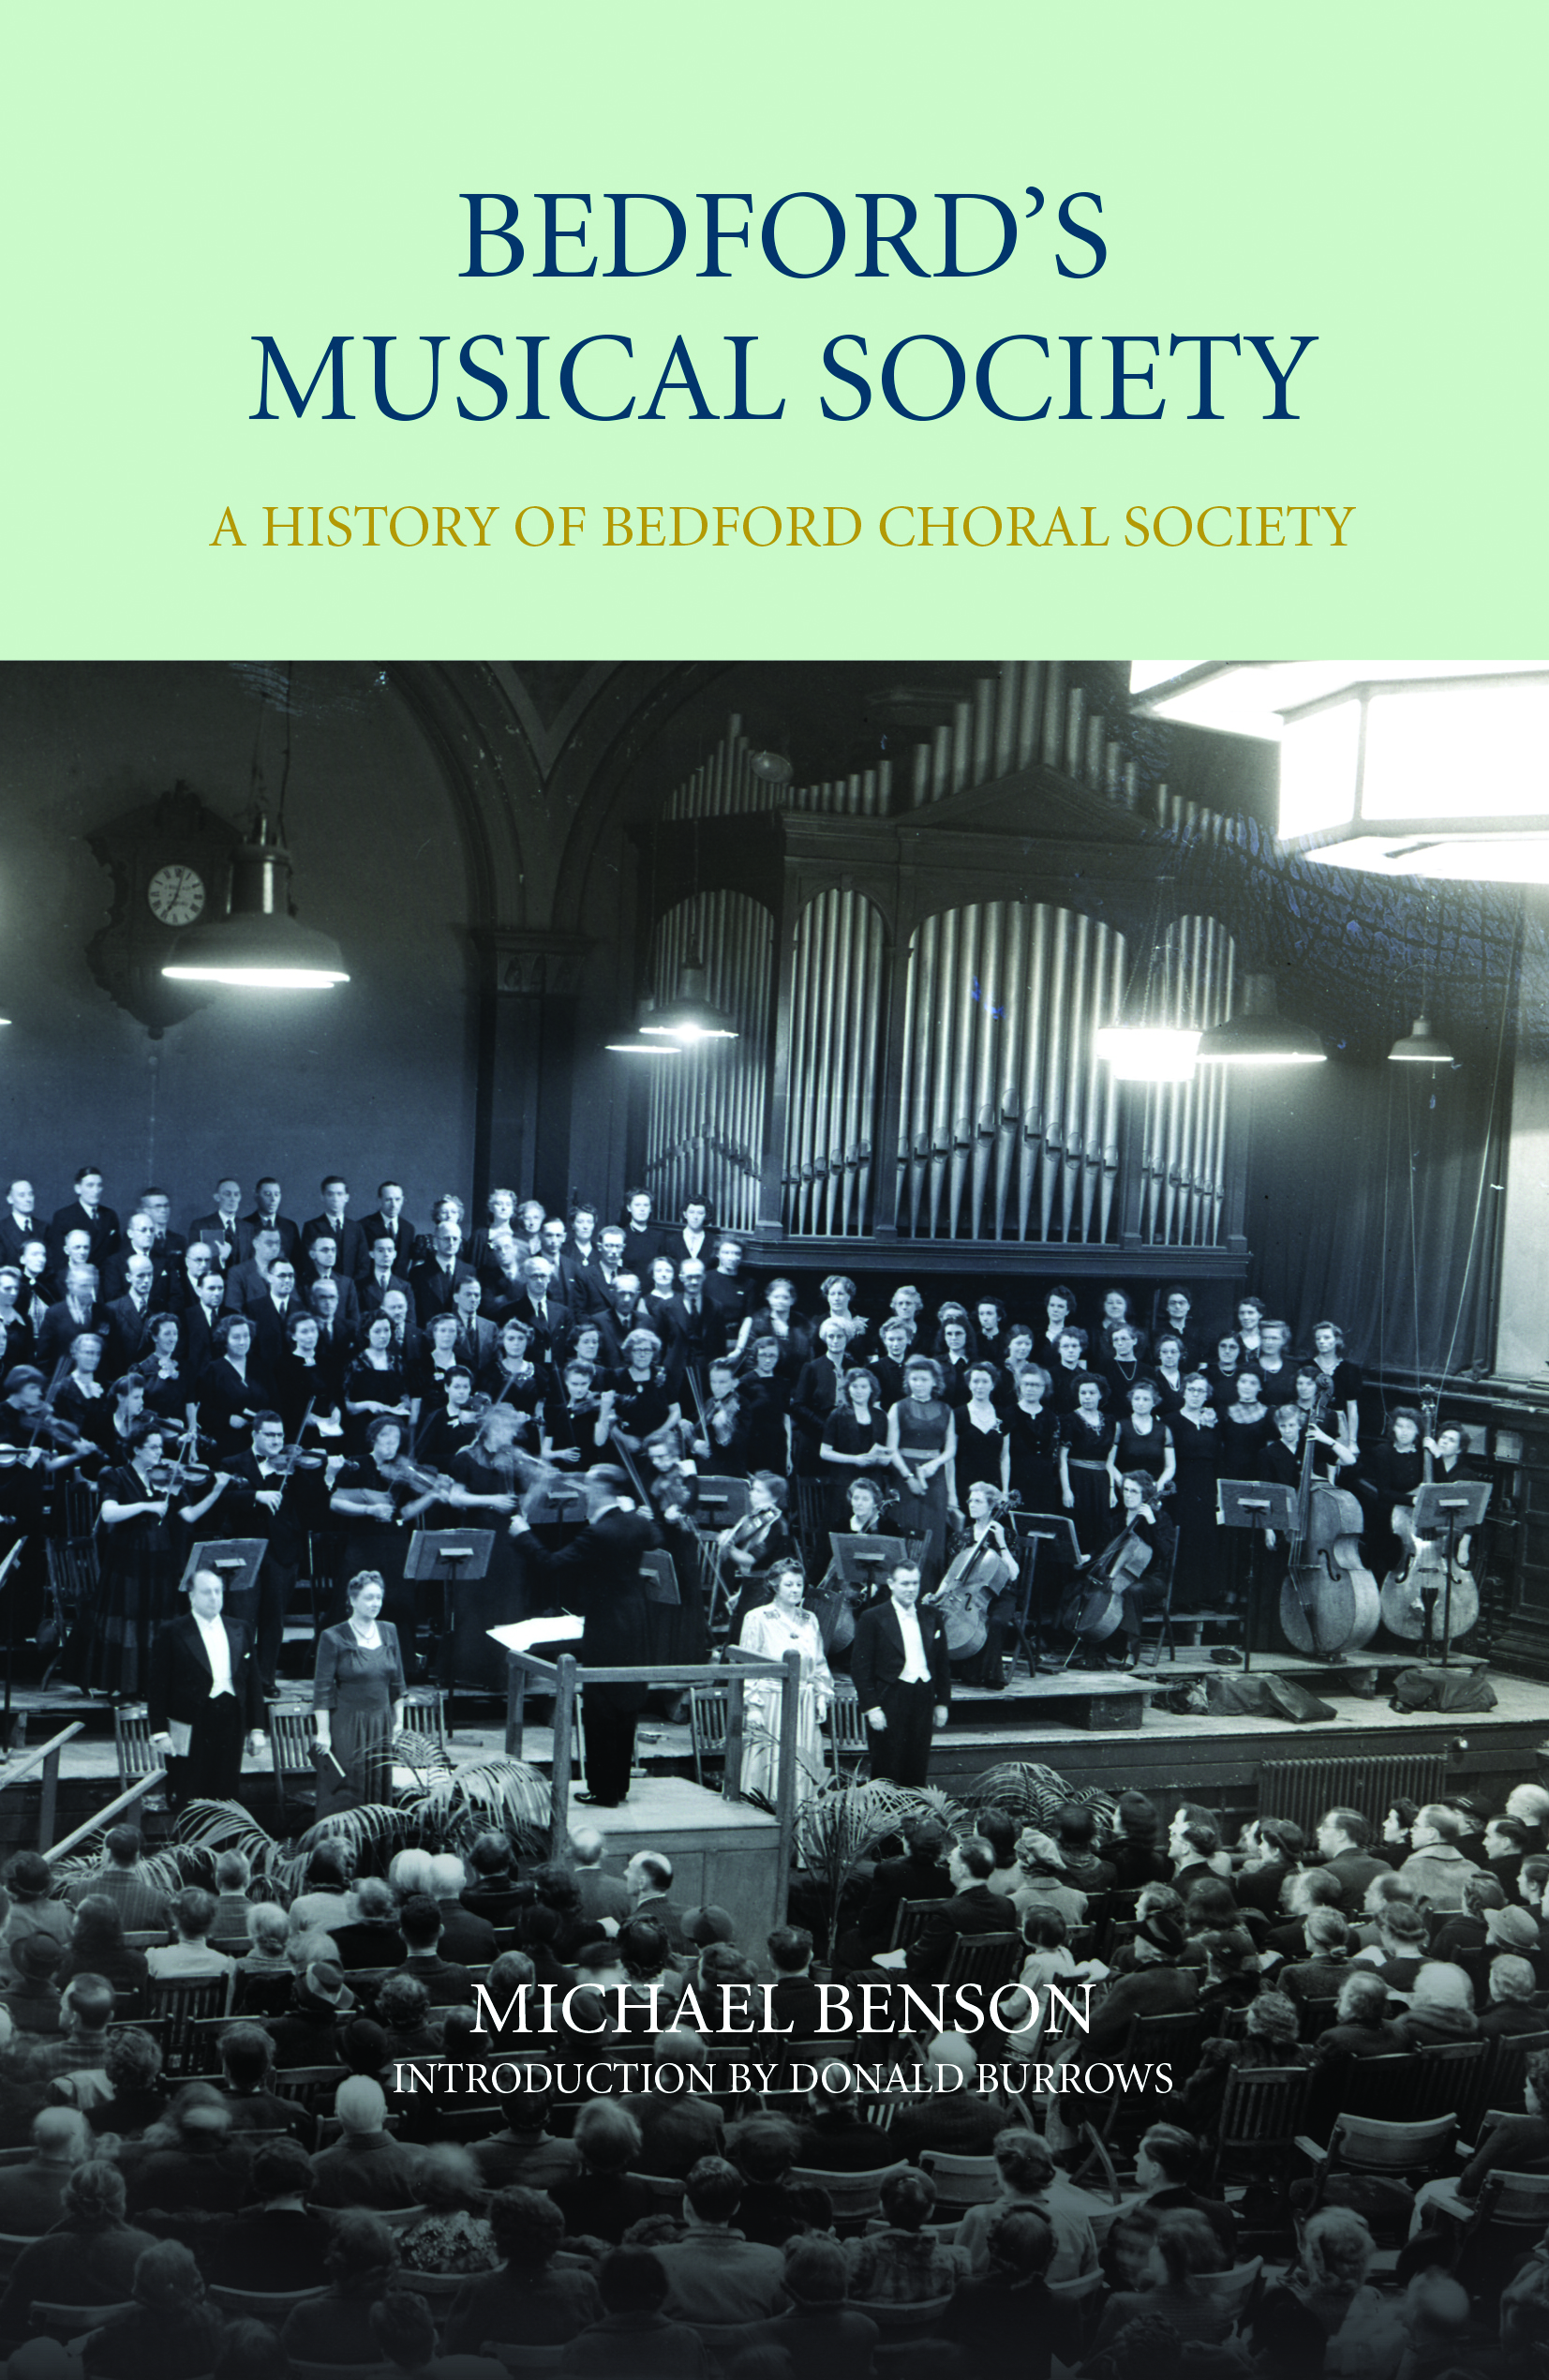 Bedford's Musical Society: